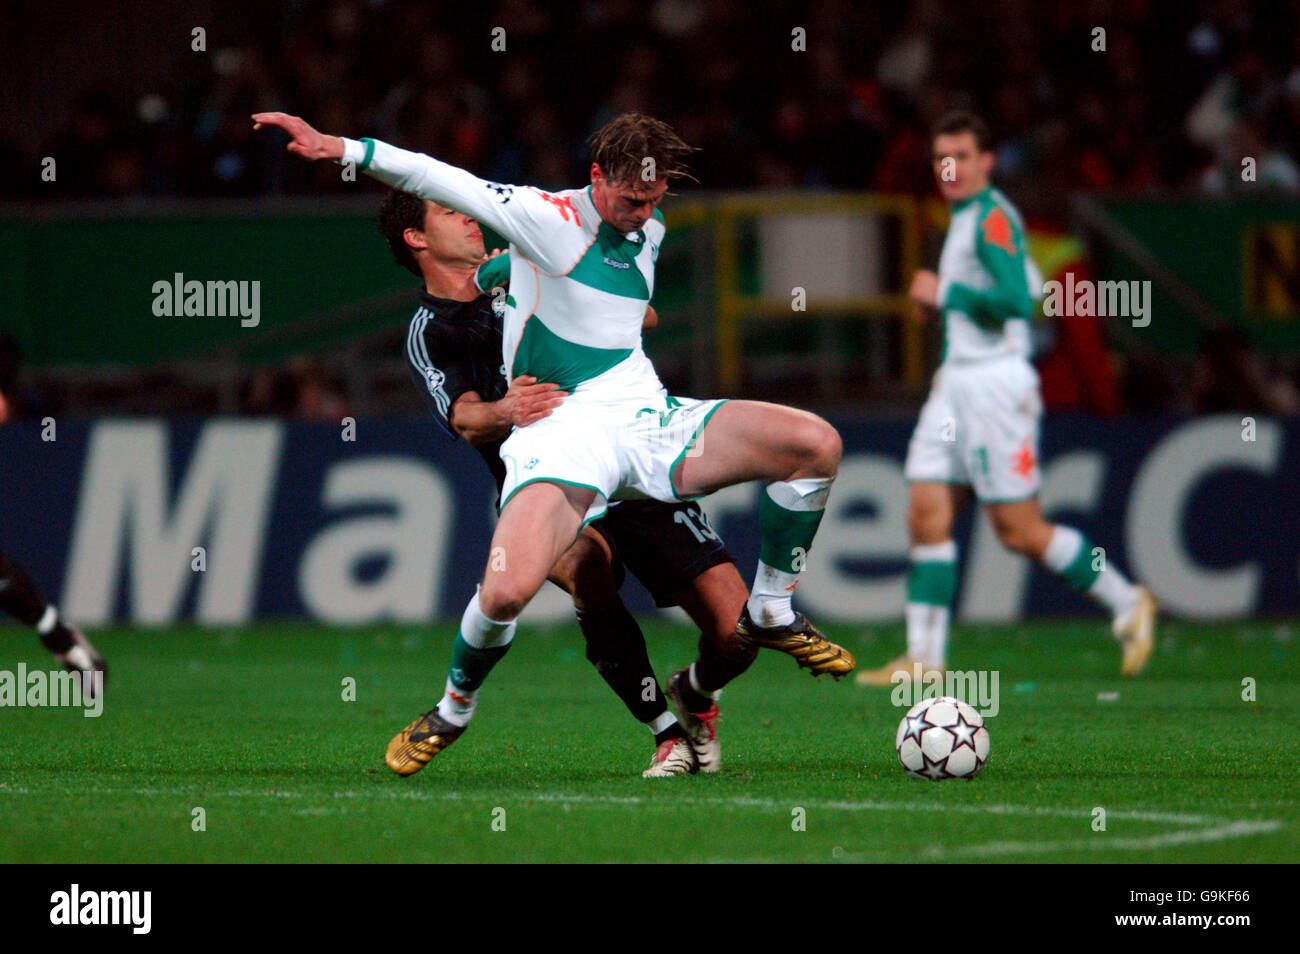 Chelsea's Michael Ballack battles for possession of the ball with Werder Bremen's Tim Borowski Stock Photo